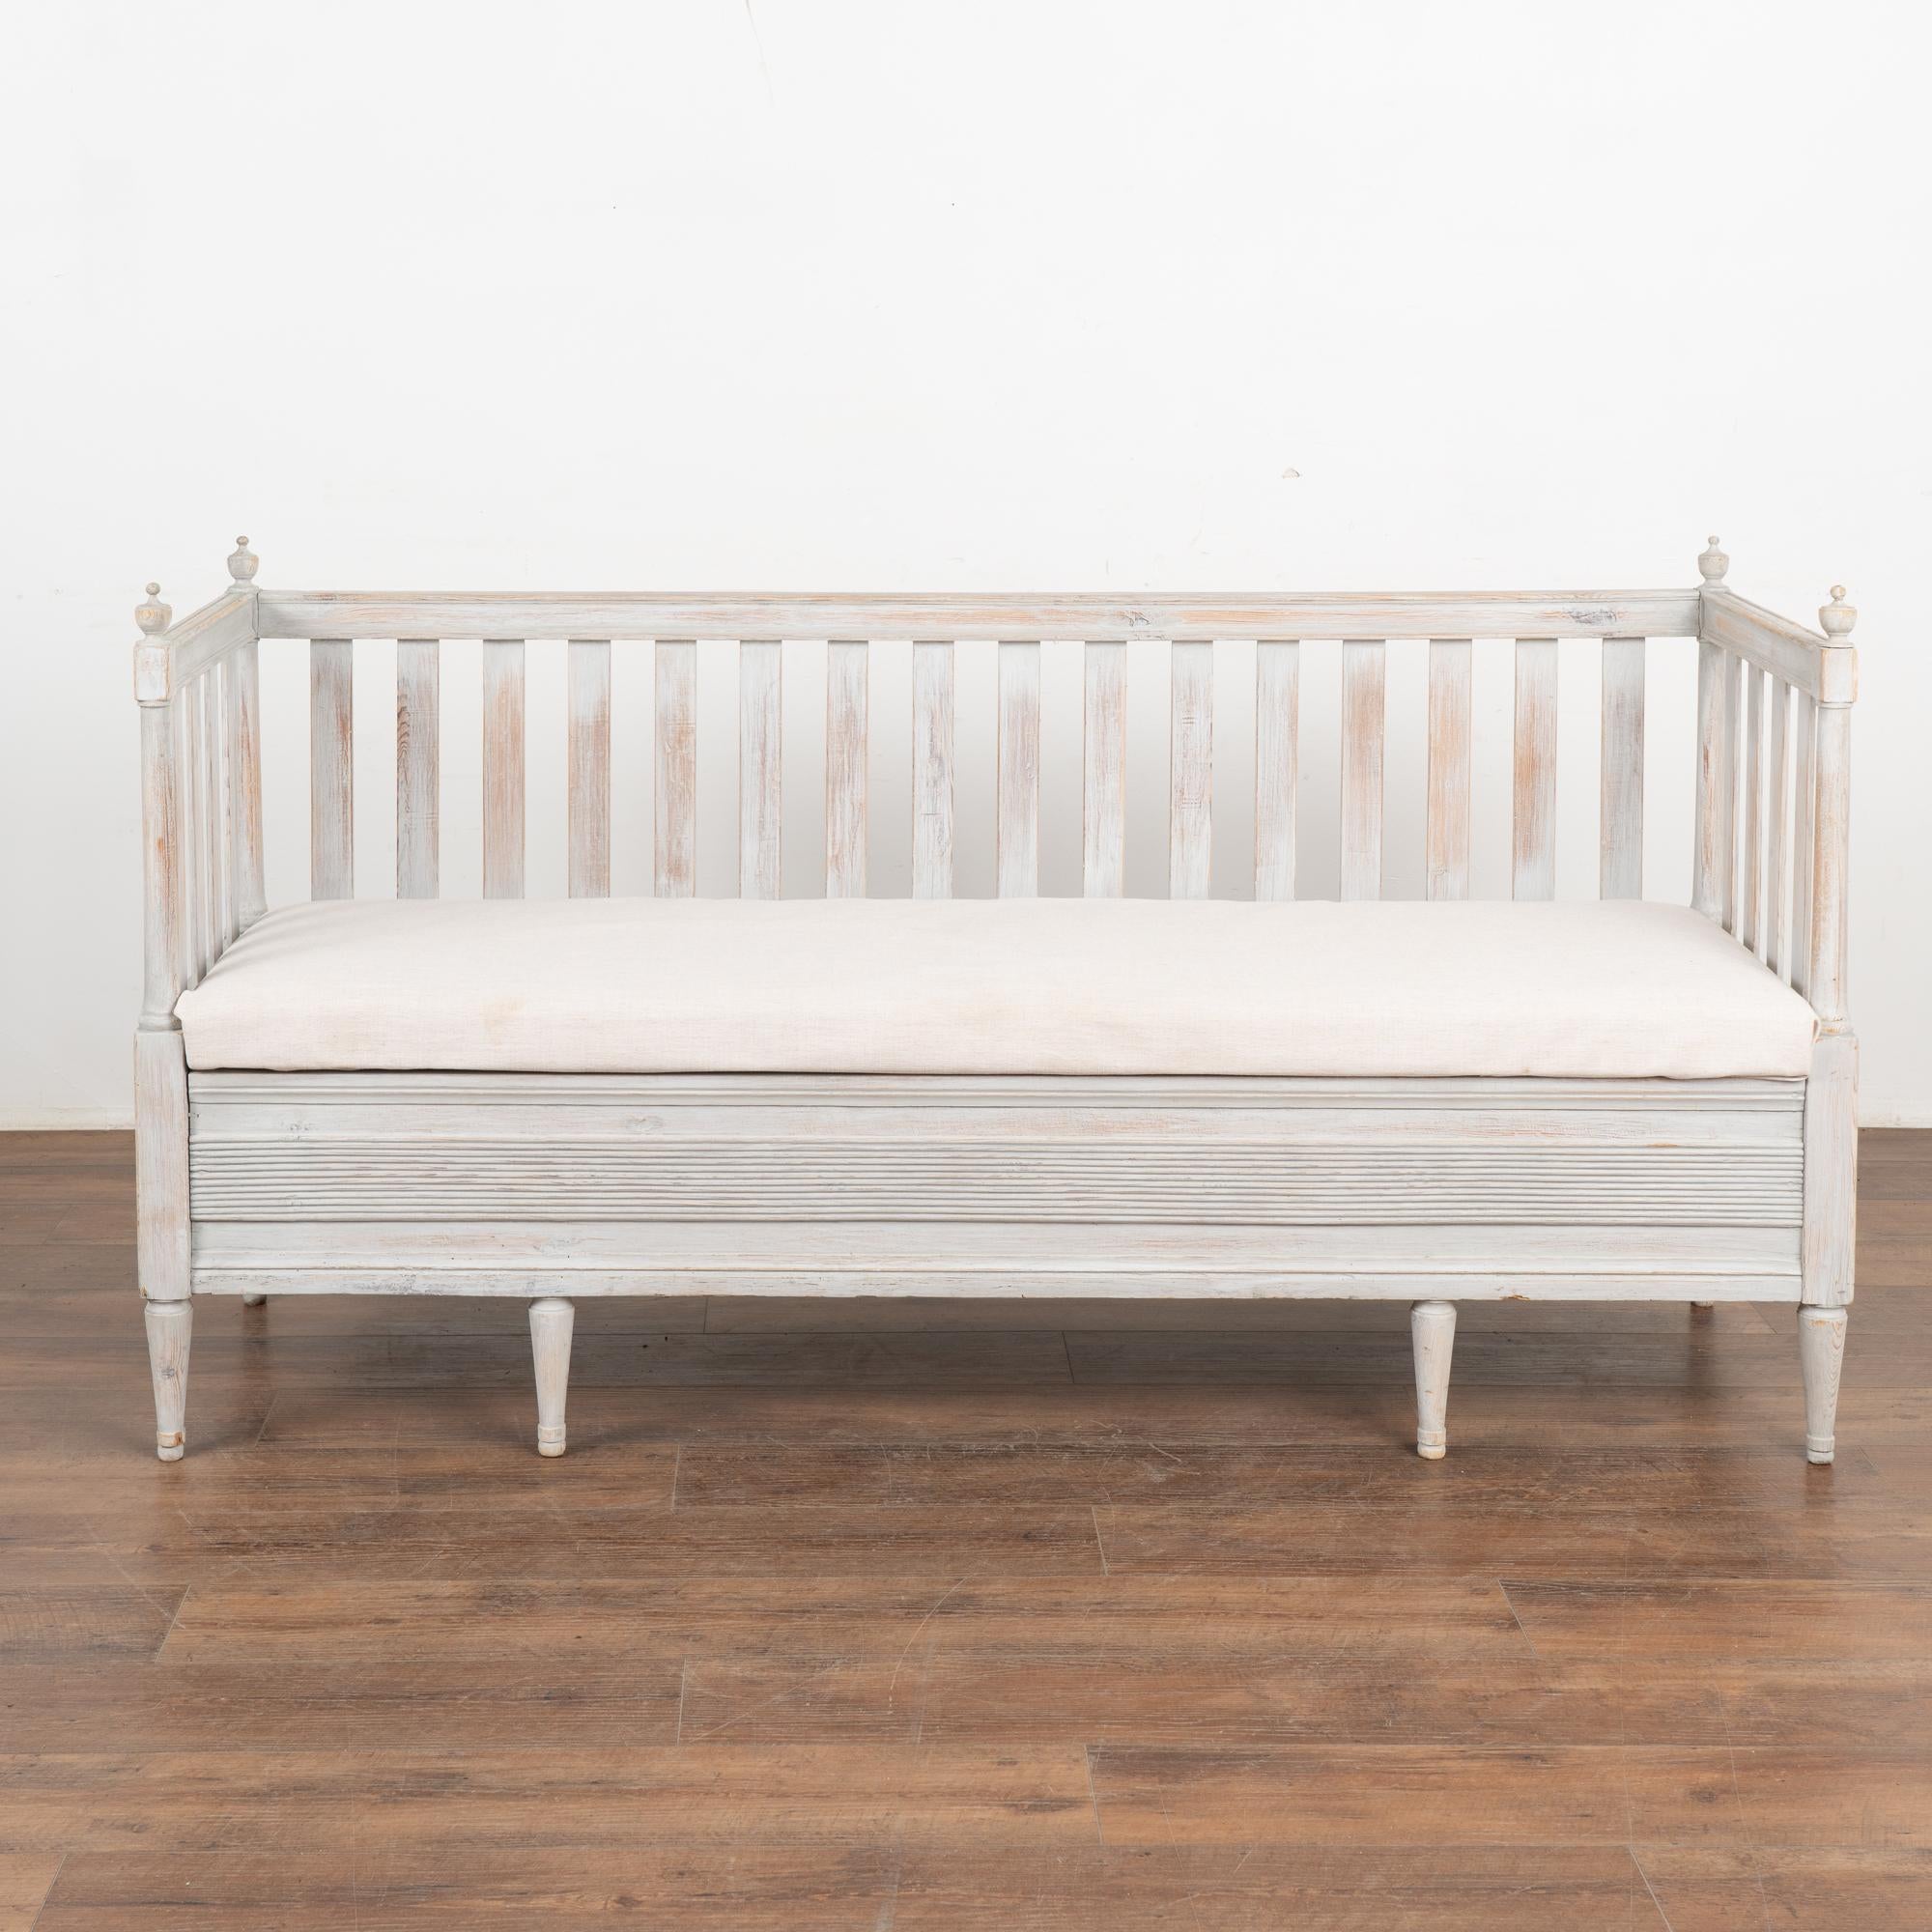 19th Century Gray Painted Gustavian Bench With Storage, Sweden circa 1840 For Sale